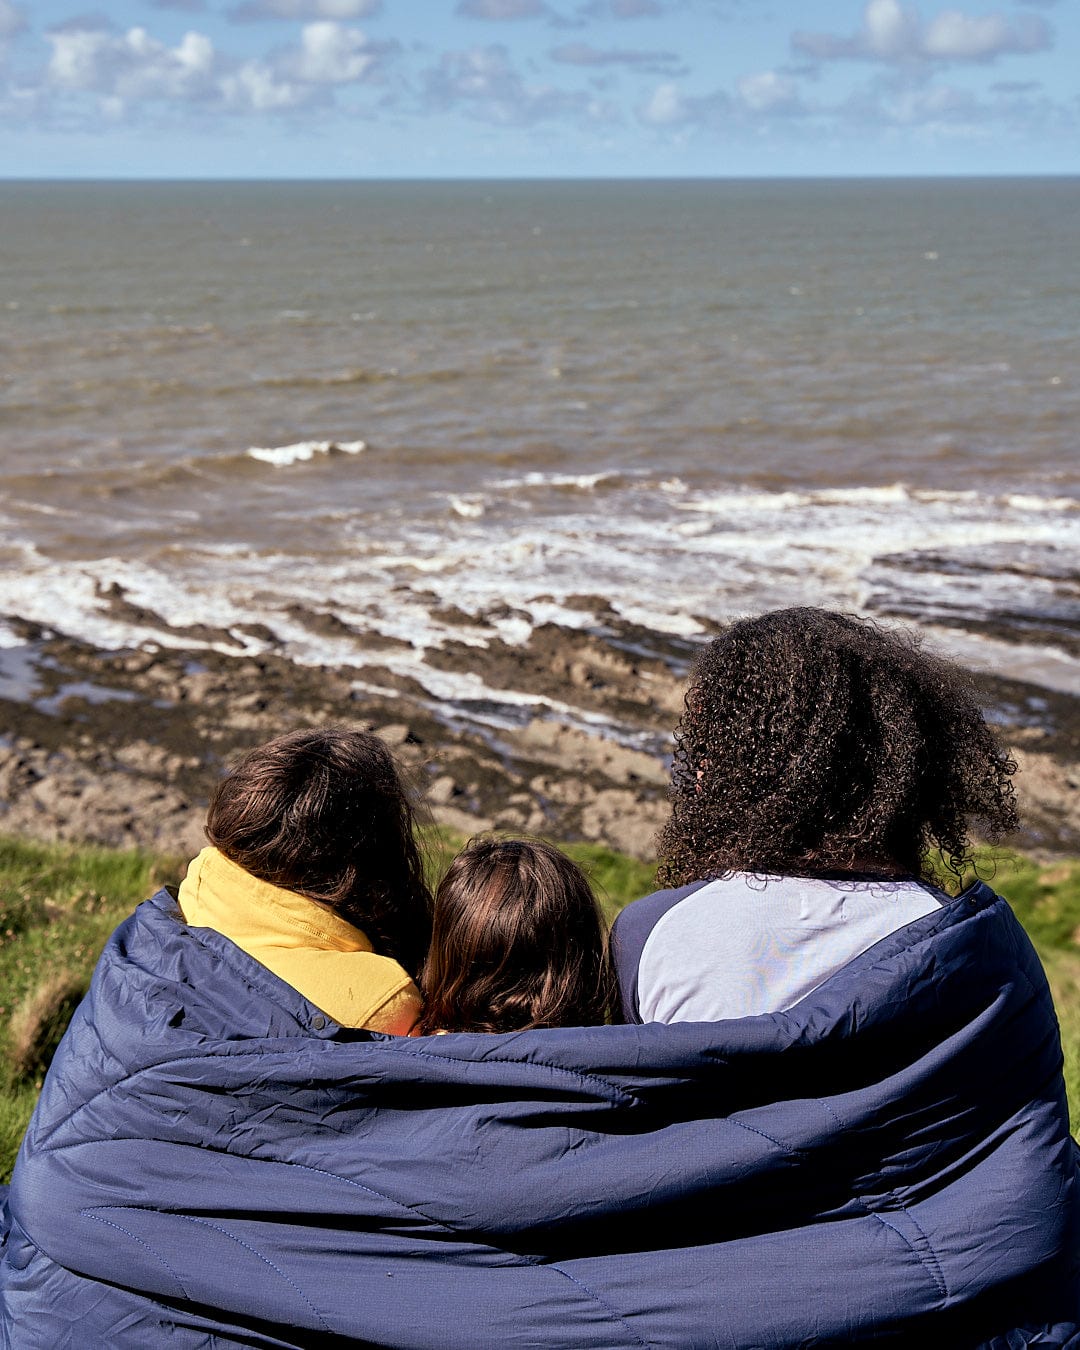 A group of people sitting on a Yogi - Camping Blanket - Blue by Saltrock looking at the ocean.